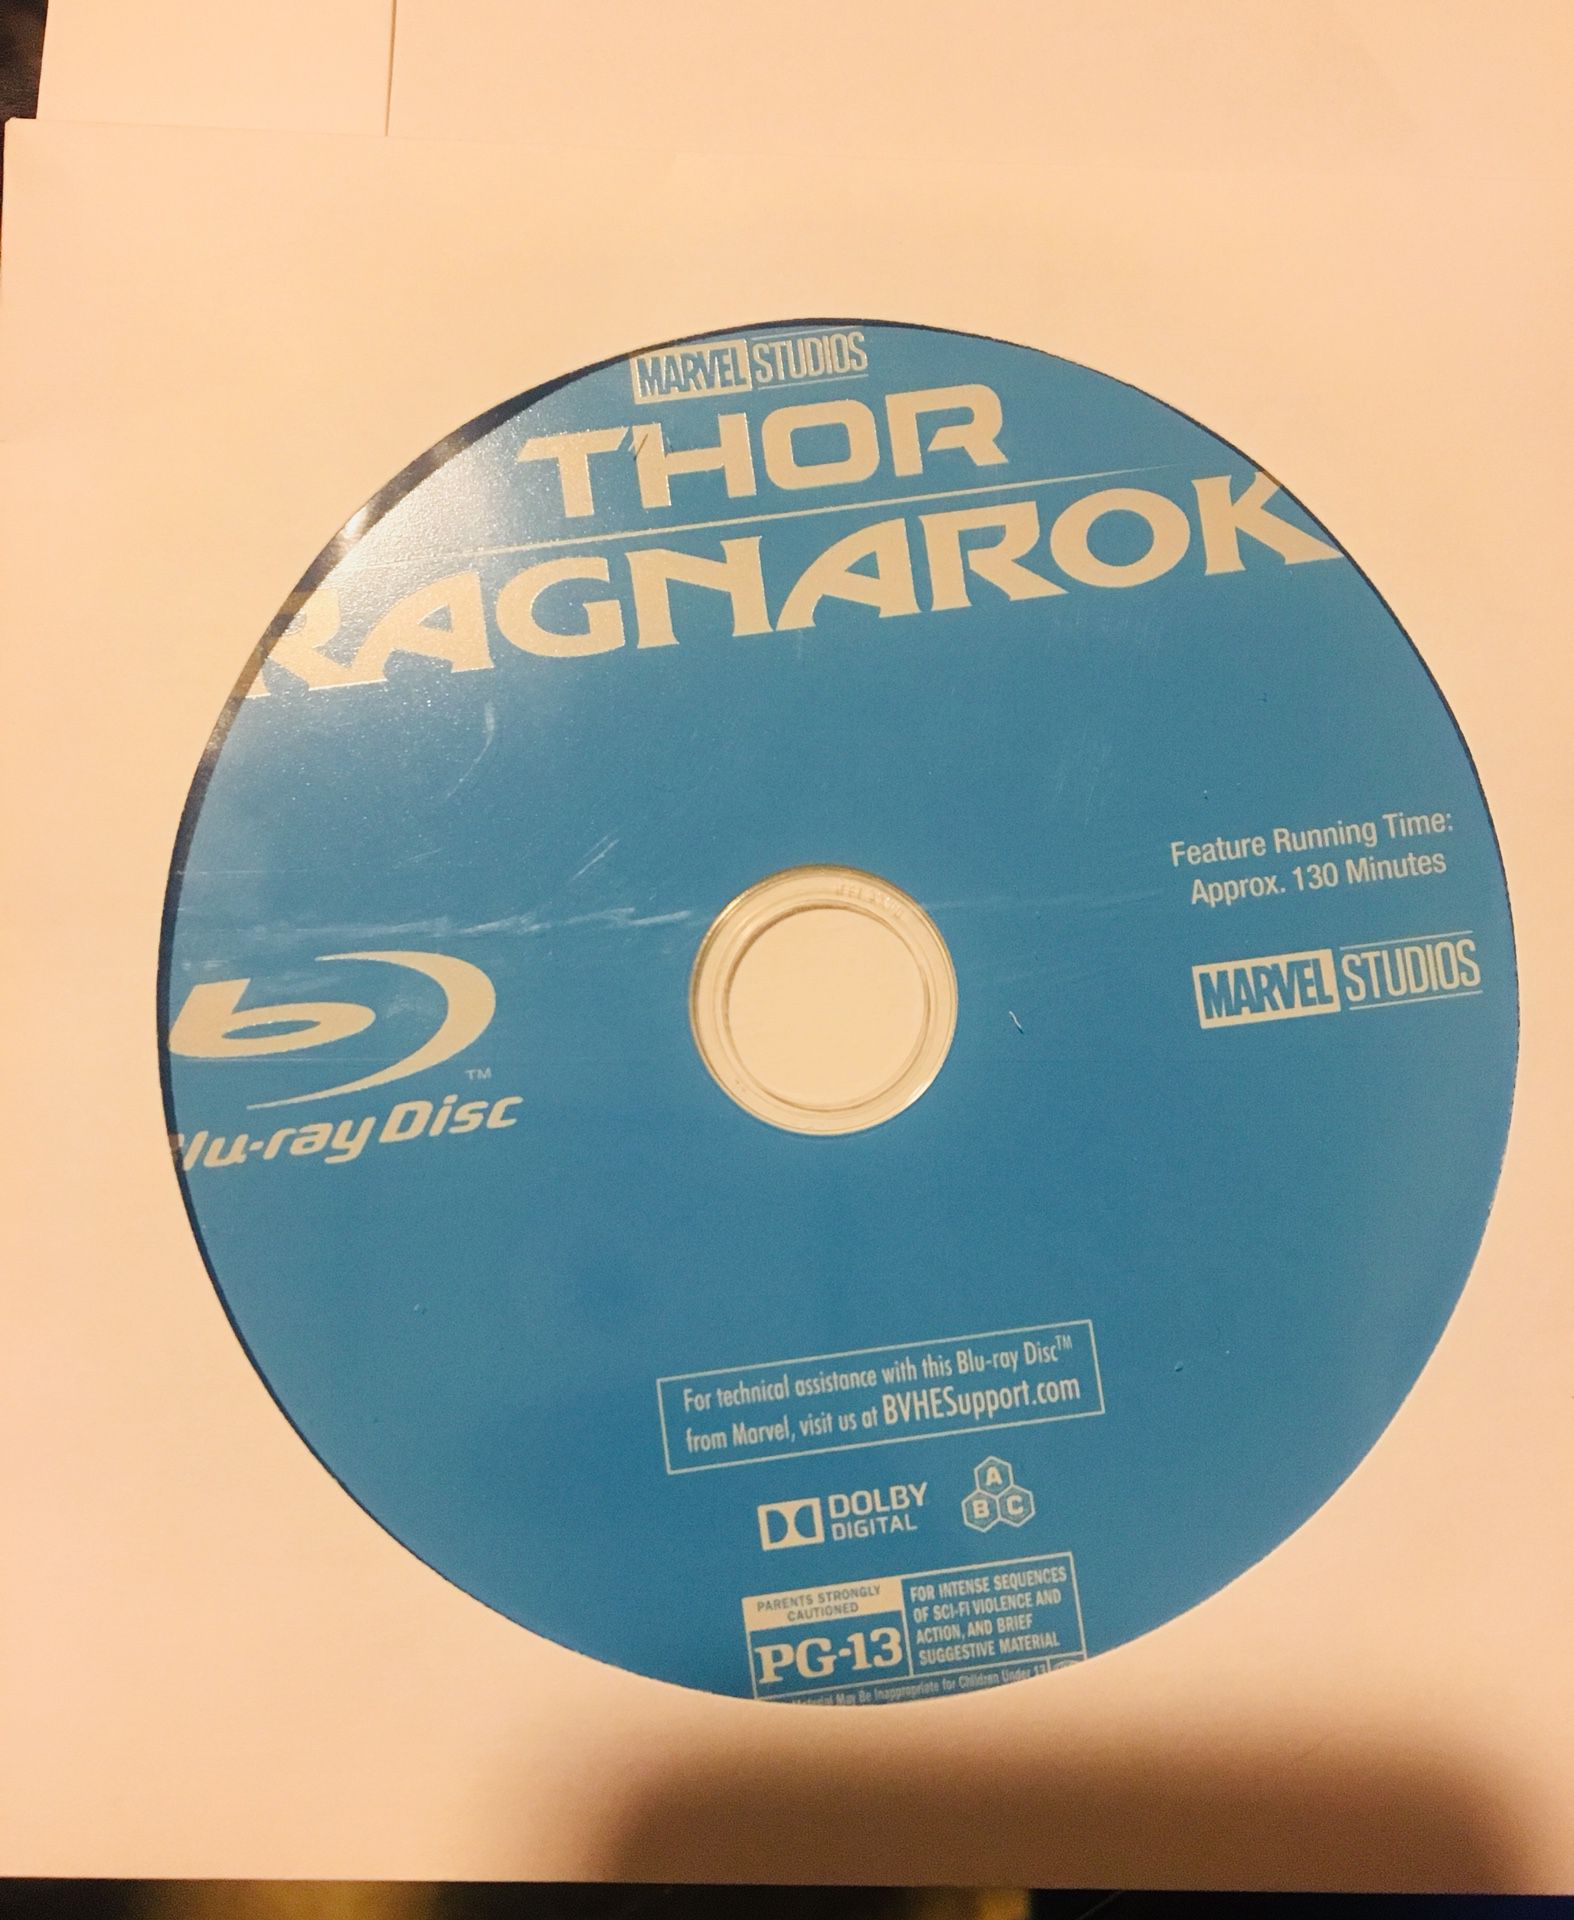 NEVER USED Thor Ragnarok Blu-ray Disc ONLY